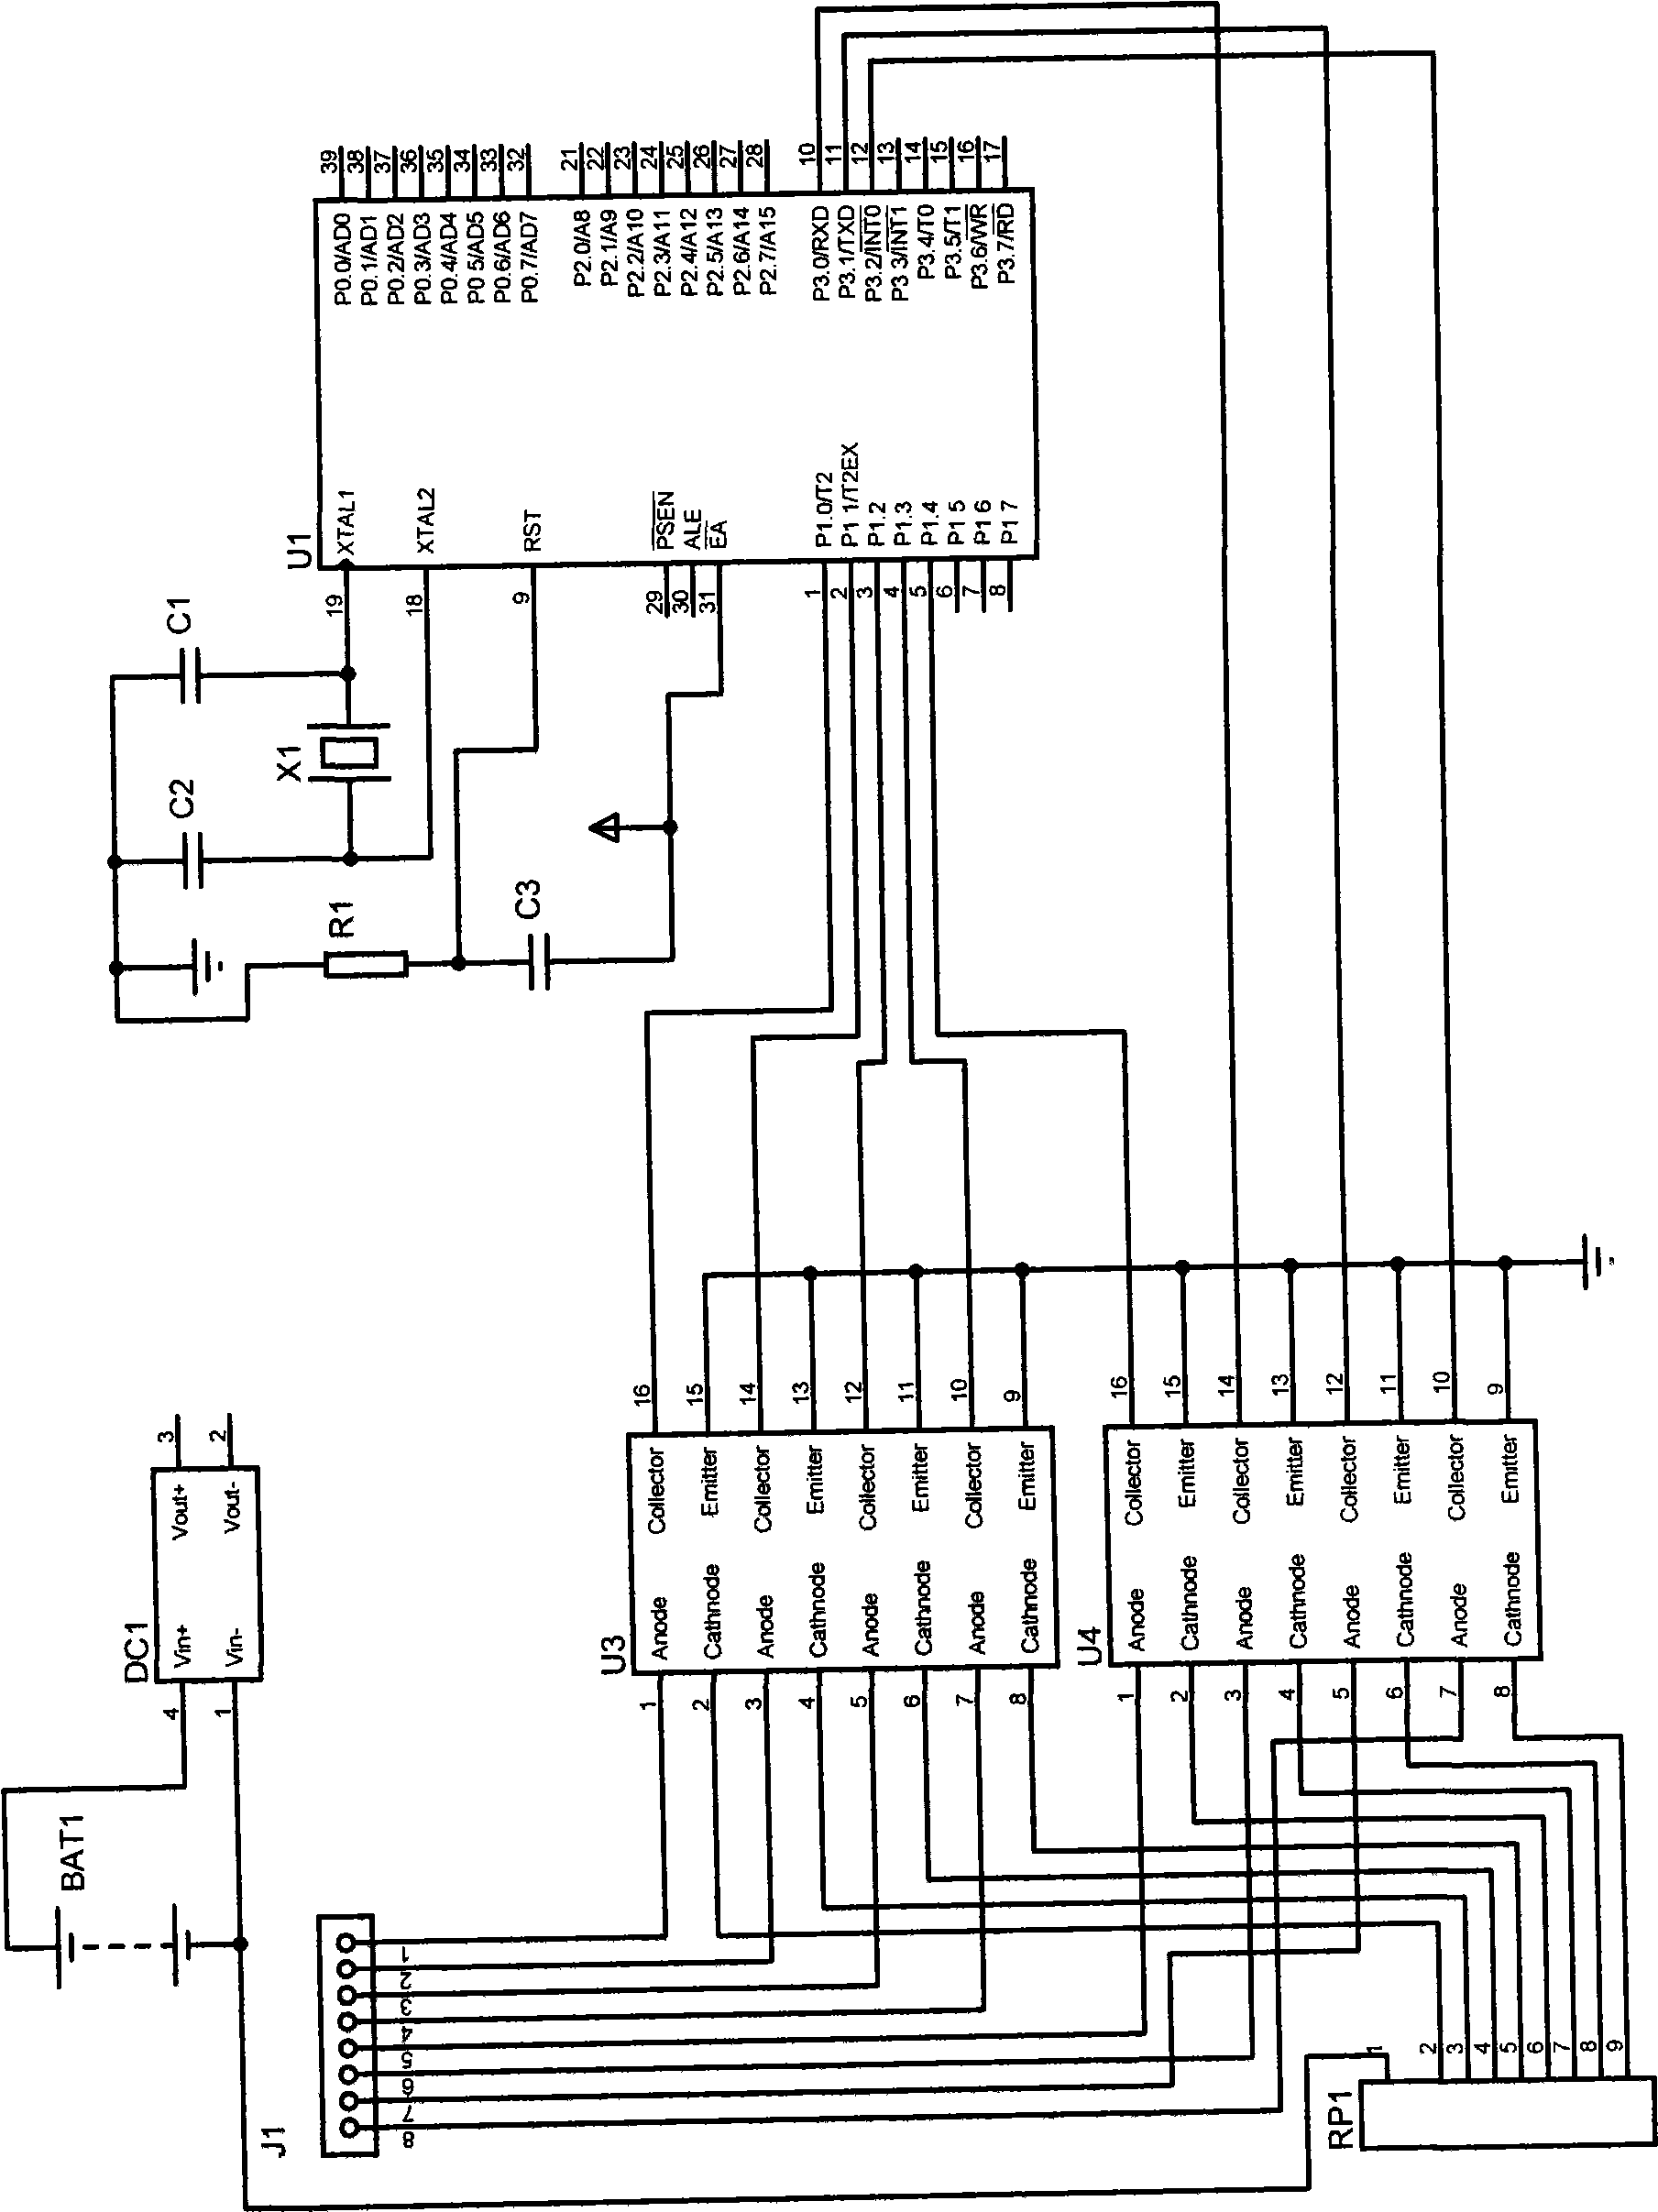 24-hour vehicle turning overspeed control device